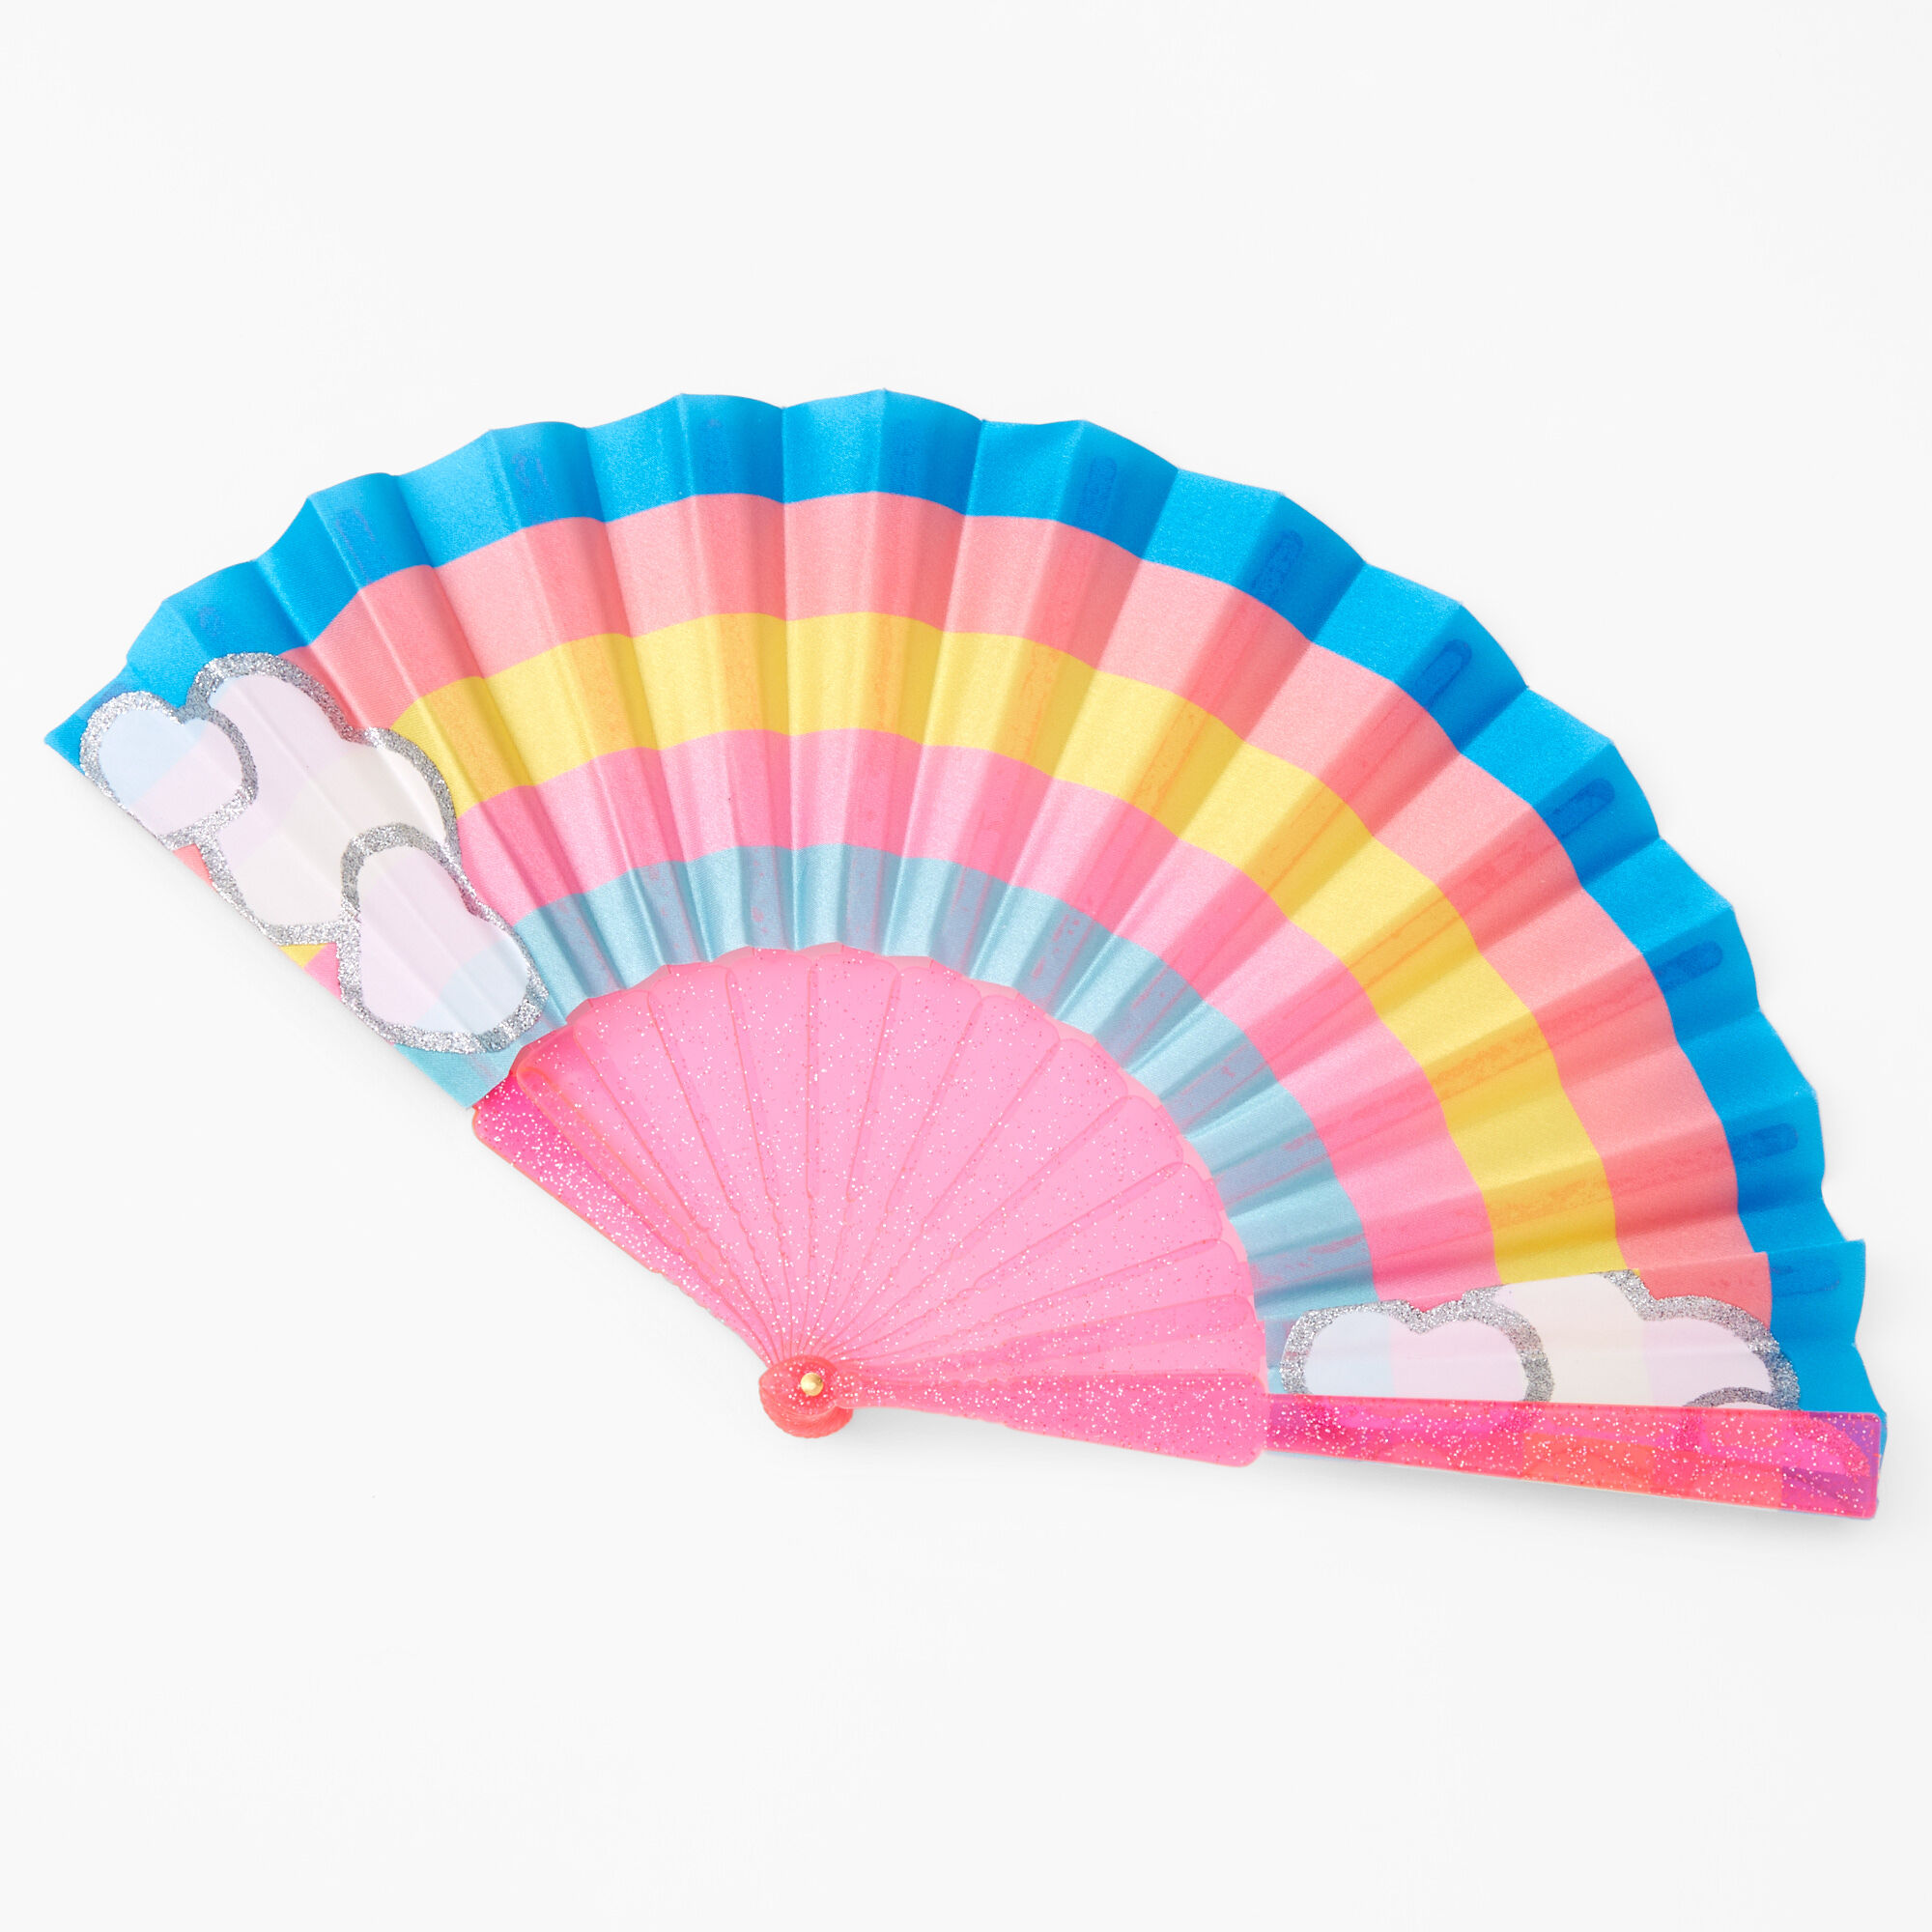 View Claires Club Glitter Rainbow Folding Fan Pink information